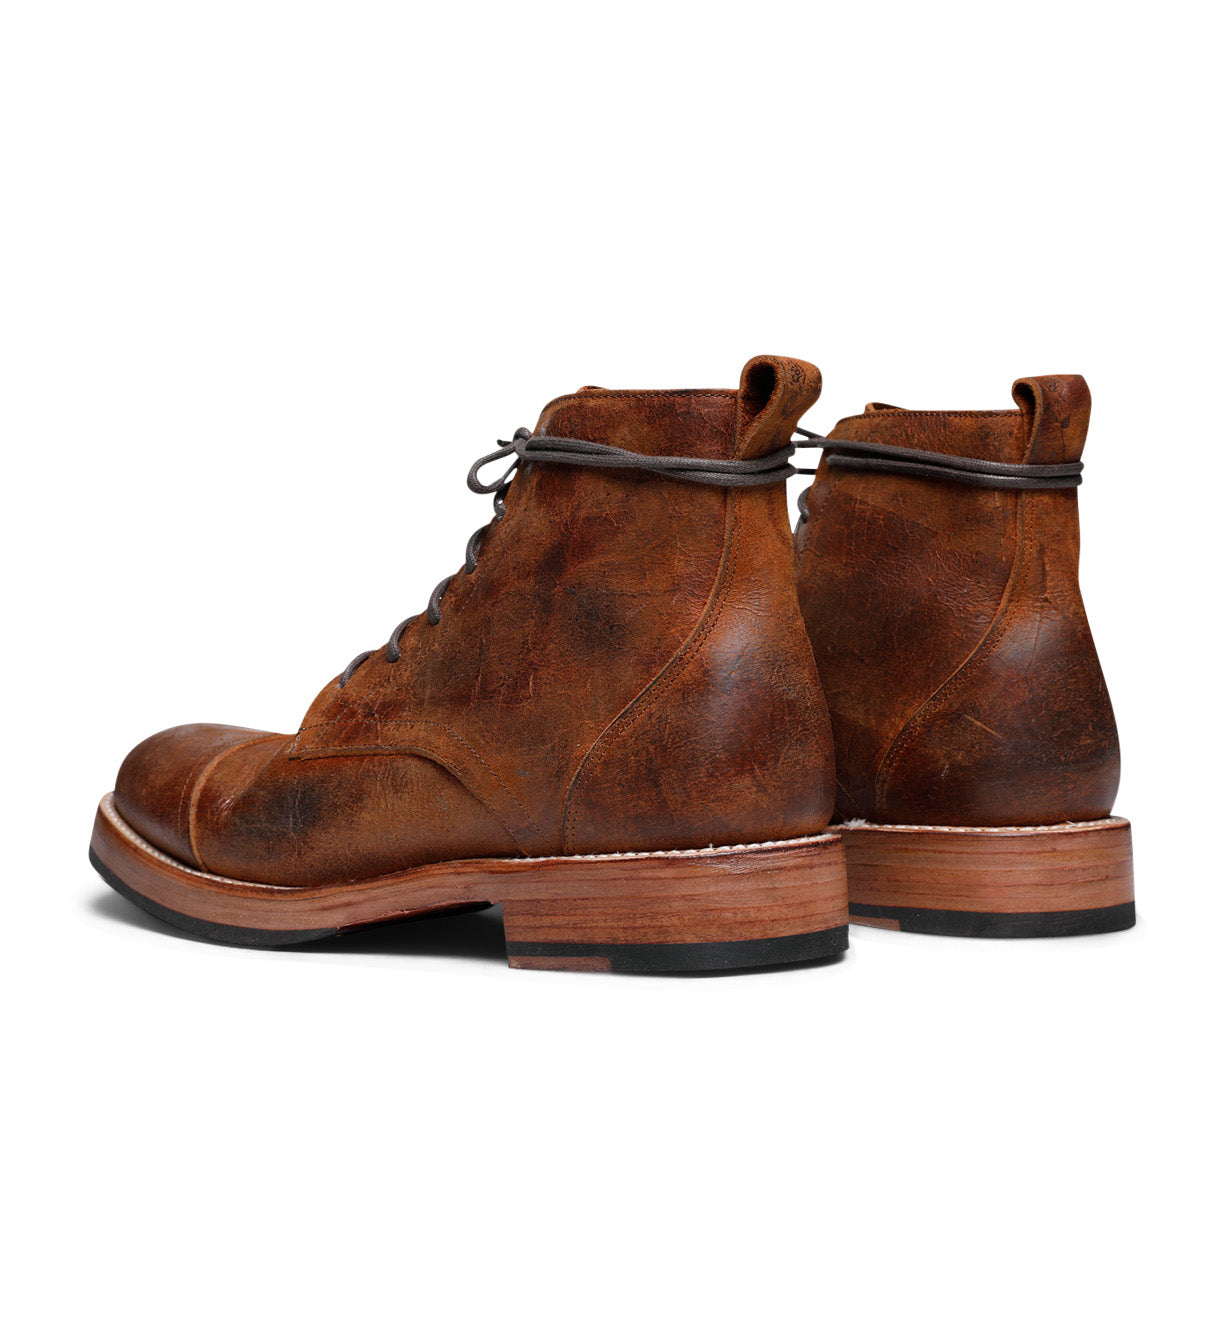 A pair of brown leather Larry boots from the Santa Rosa Brand collection on a white background.